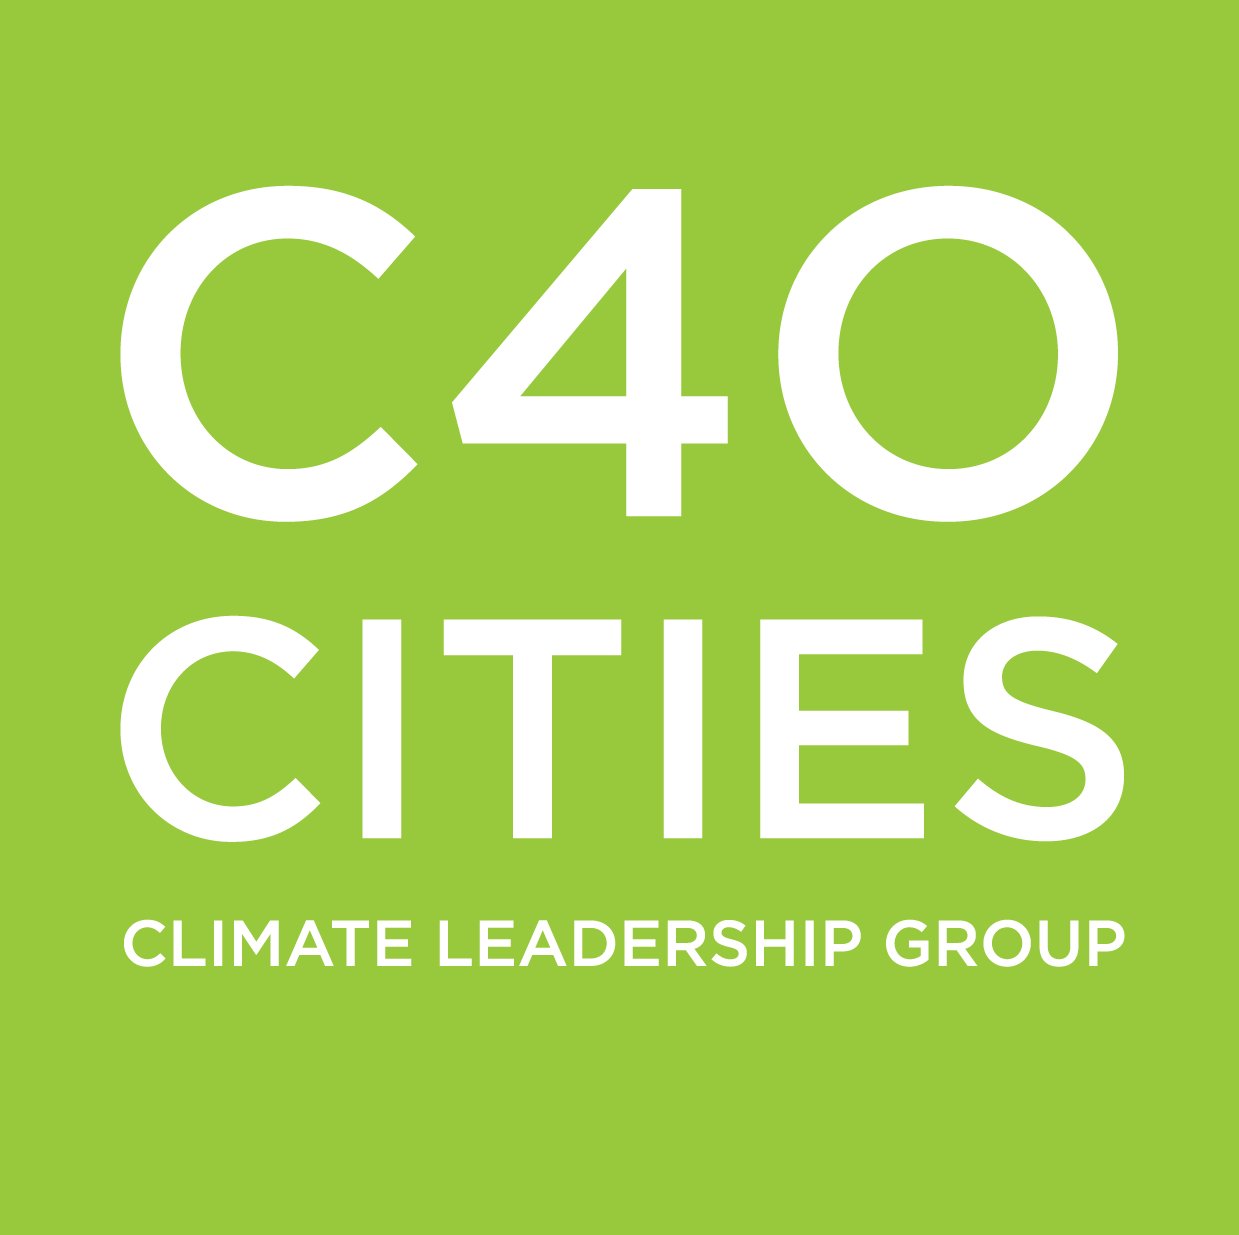 C40_Cities_Climate_Leadership_Group_Logo.png